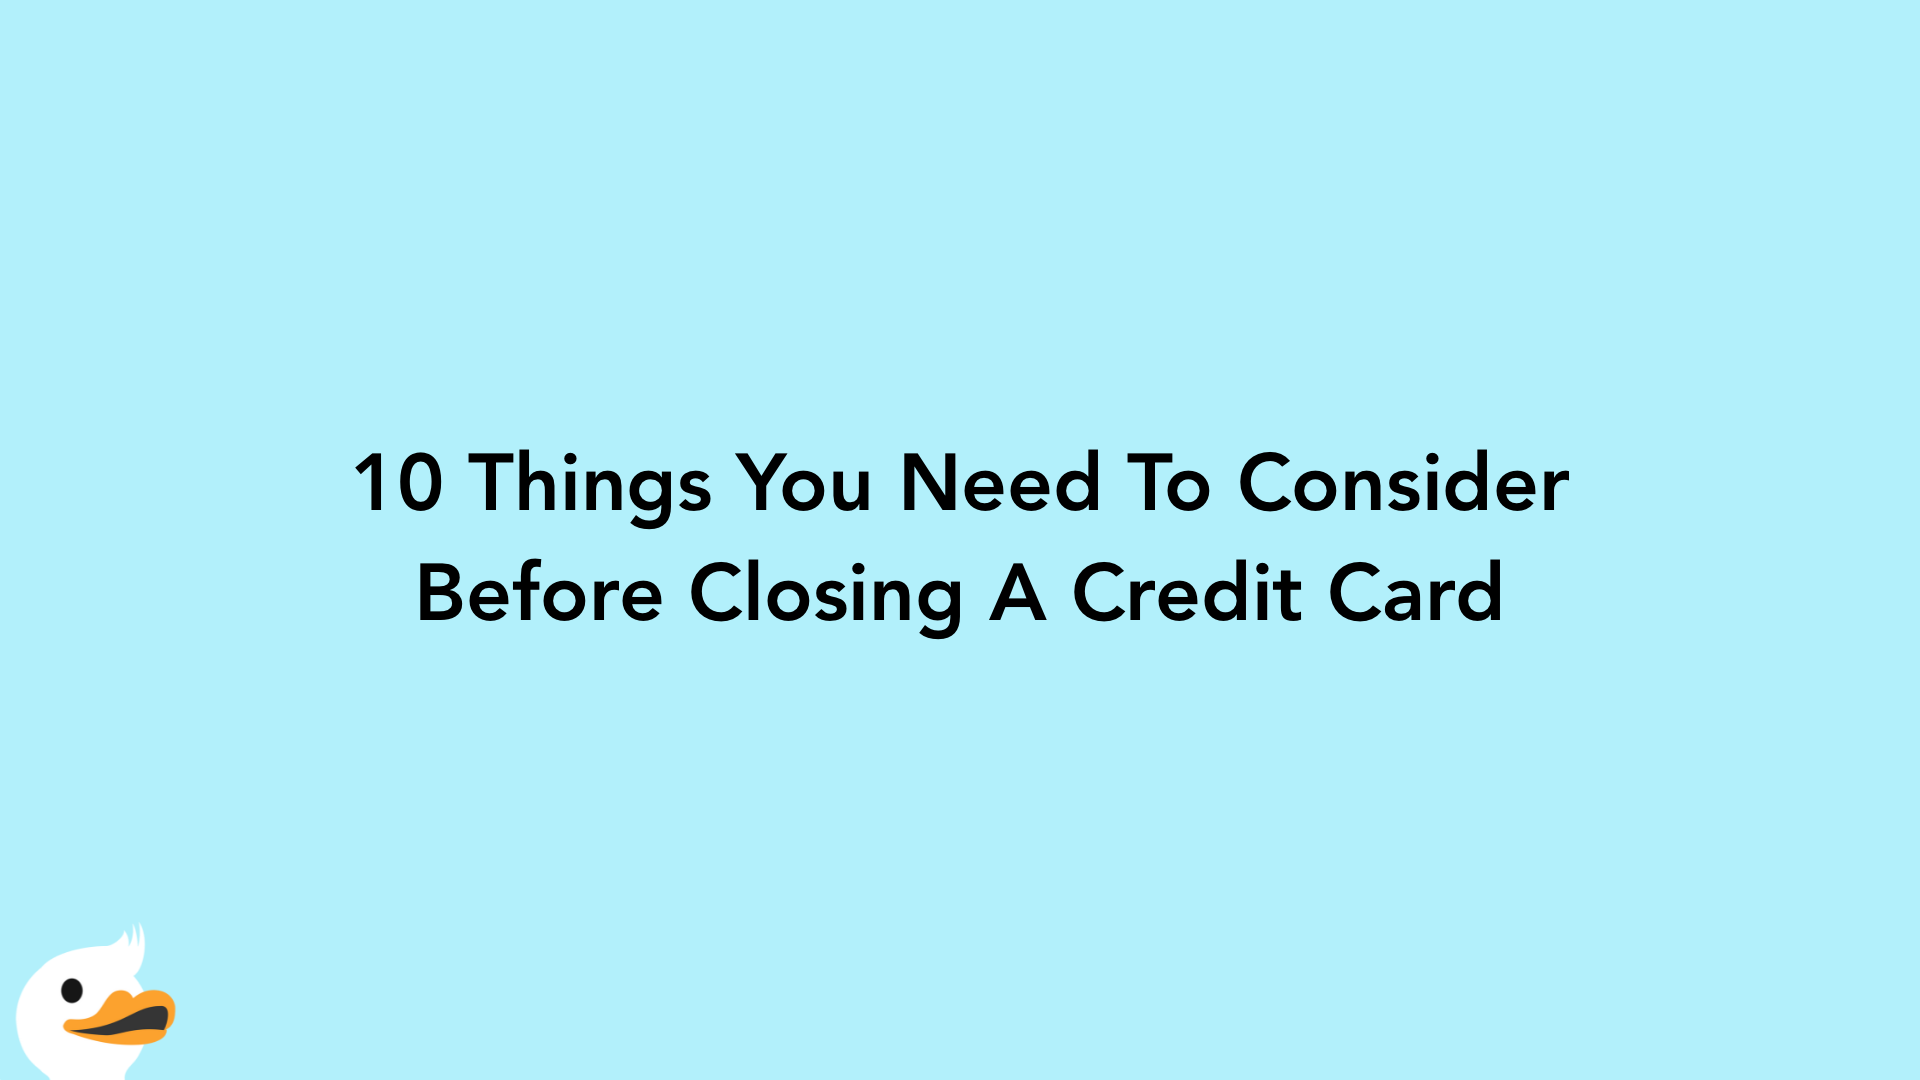 10 Things You Need To Consider Before Closing A Credit Card